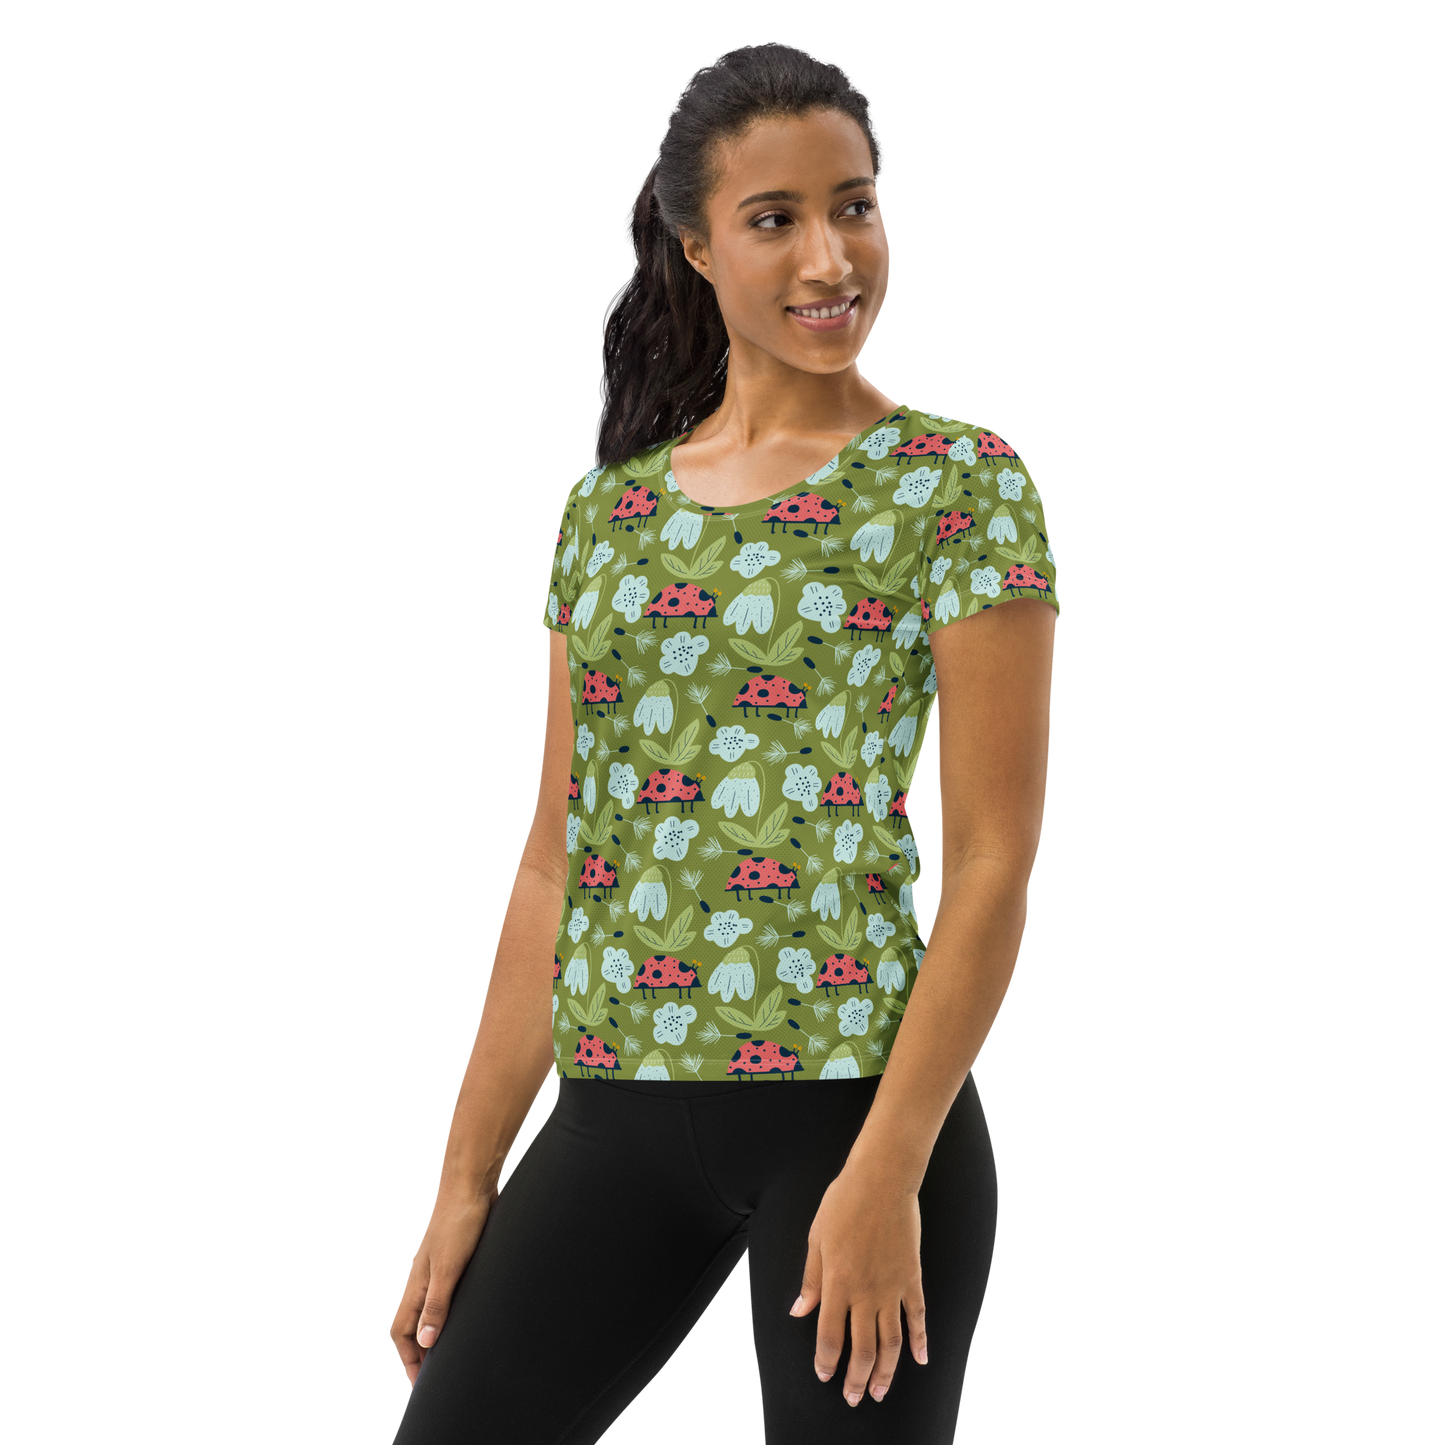 Scandinavian Spring Floral | Seamless Patterns | All-Over Print Women's Athletic T-Shirt - #5